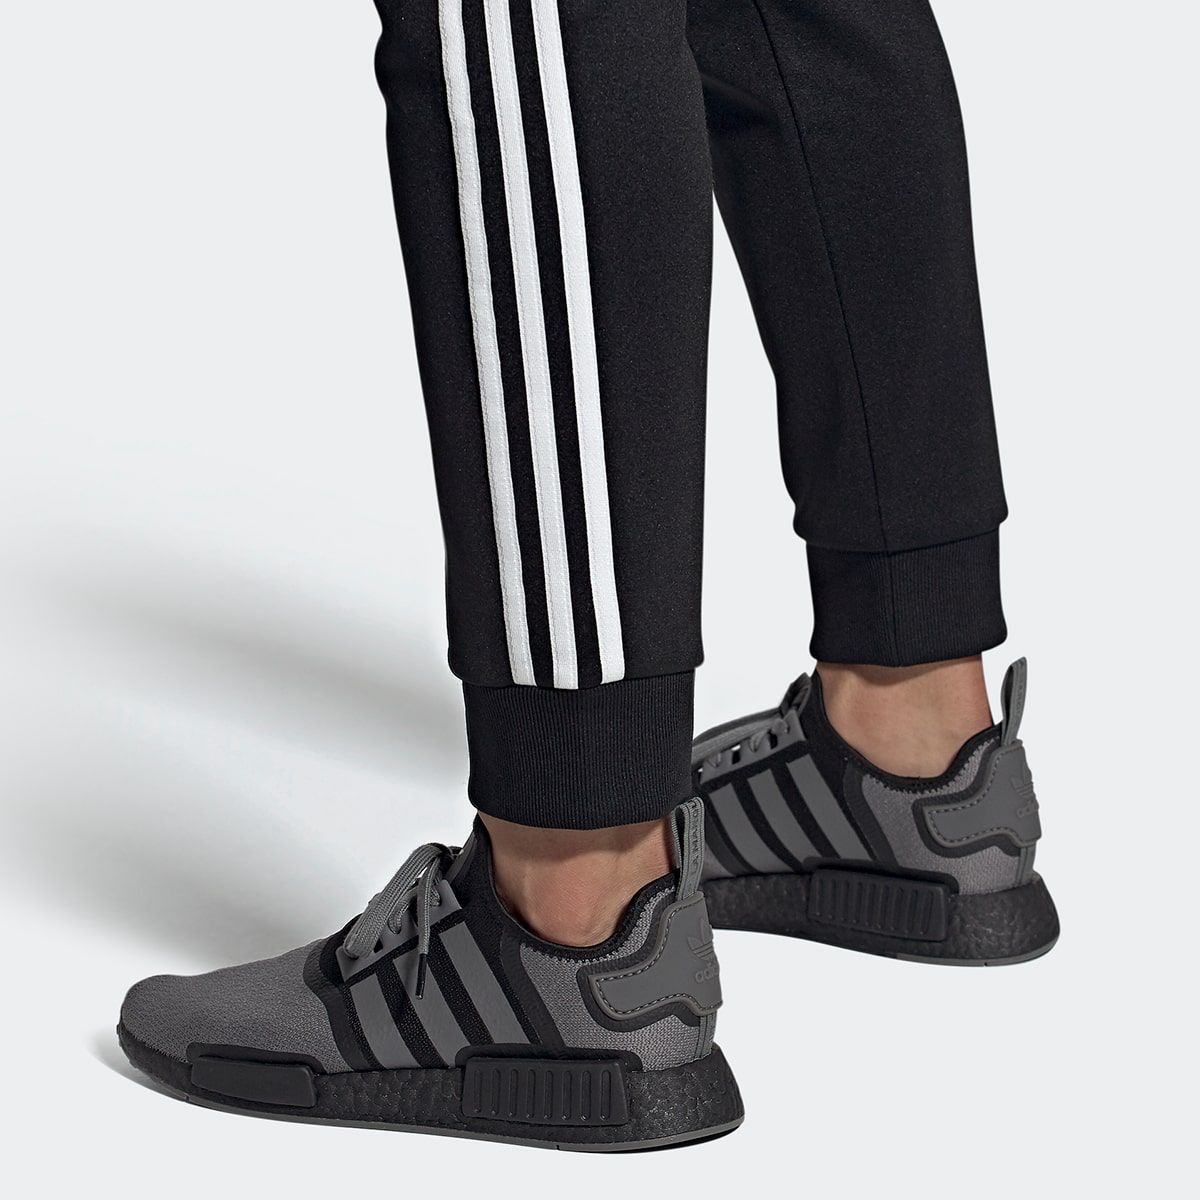 black and grey nmds